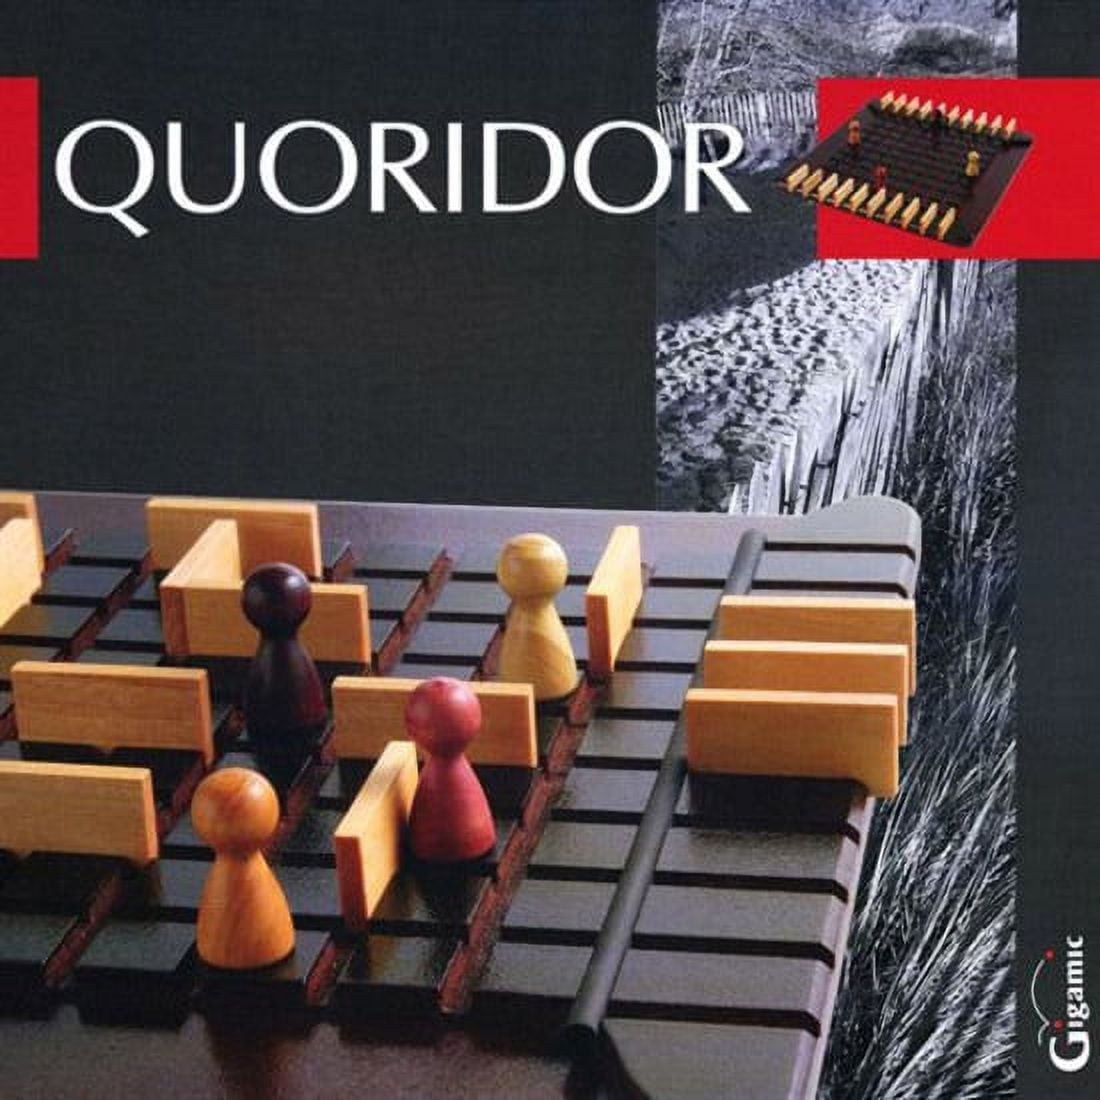 Quoridor Wooden Board Game Original 2-4 players - 100% Complete Gigamic 1997